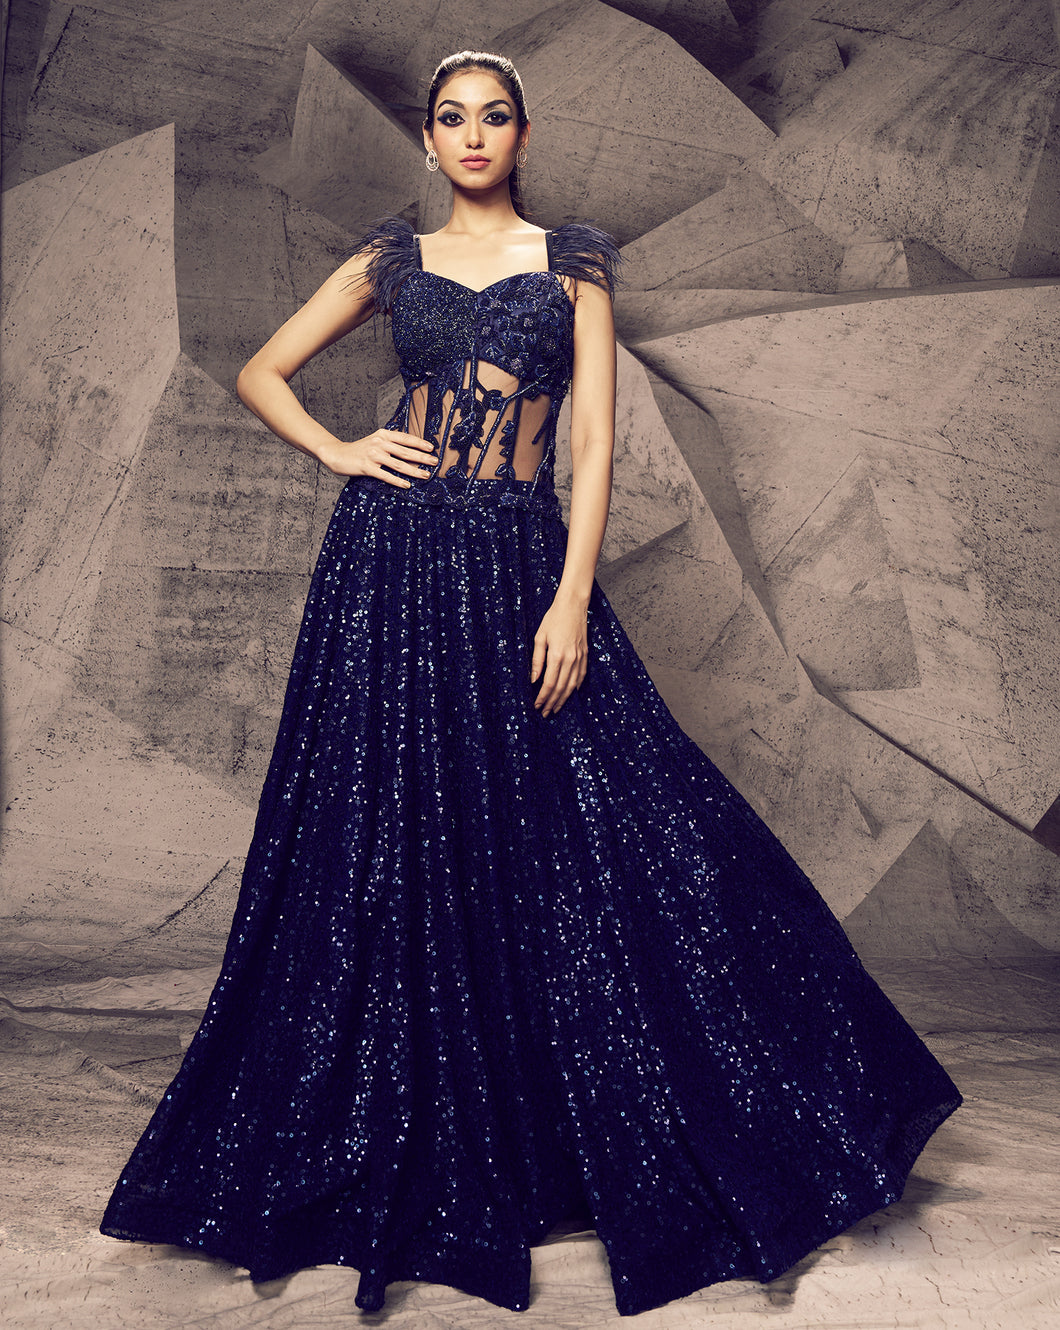 The Shimmering Blue Gown